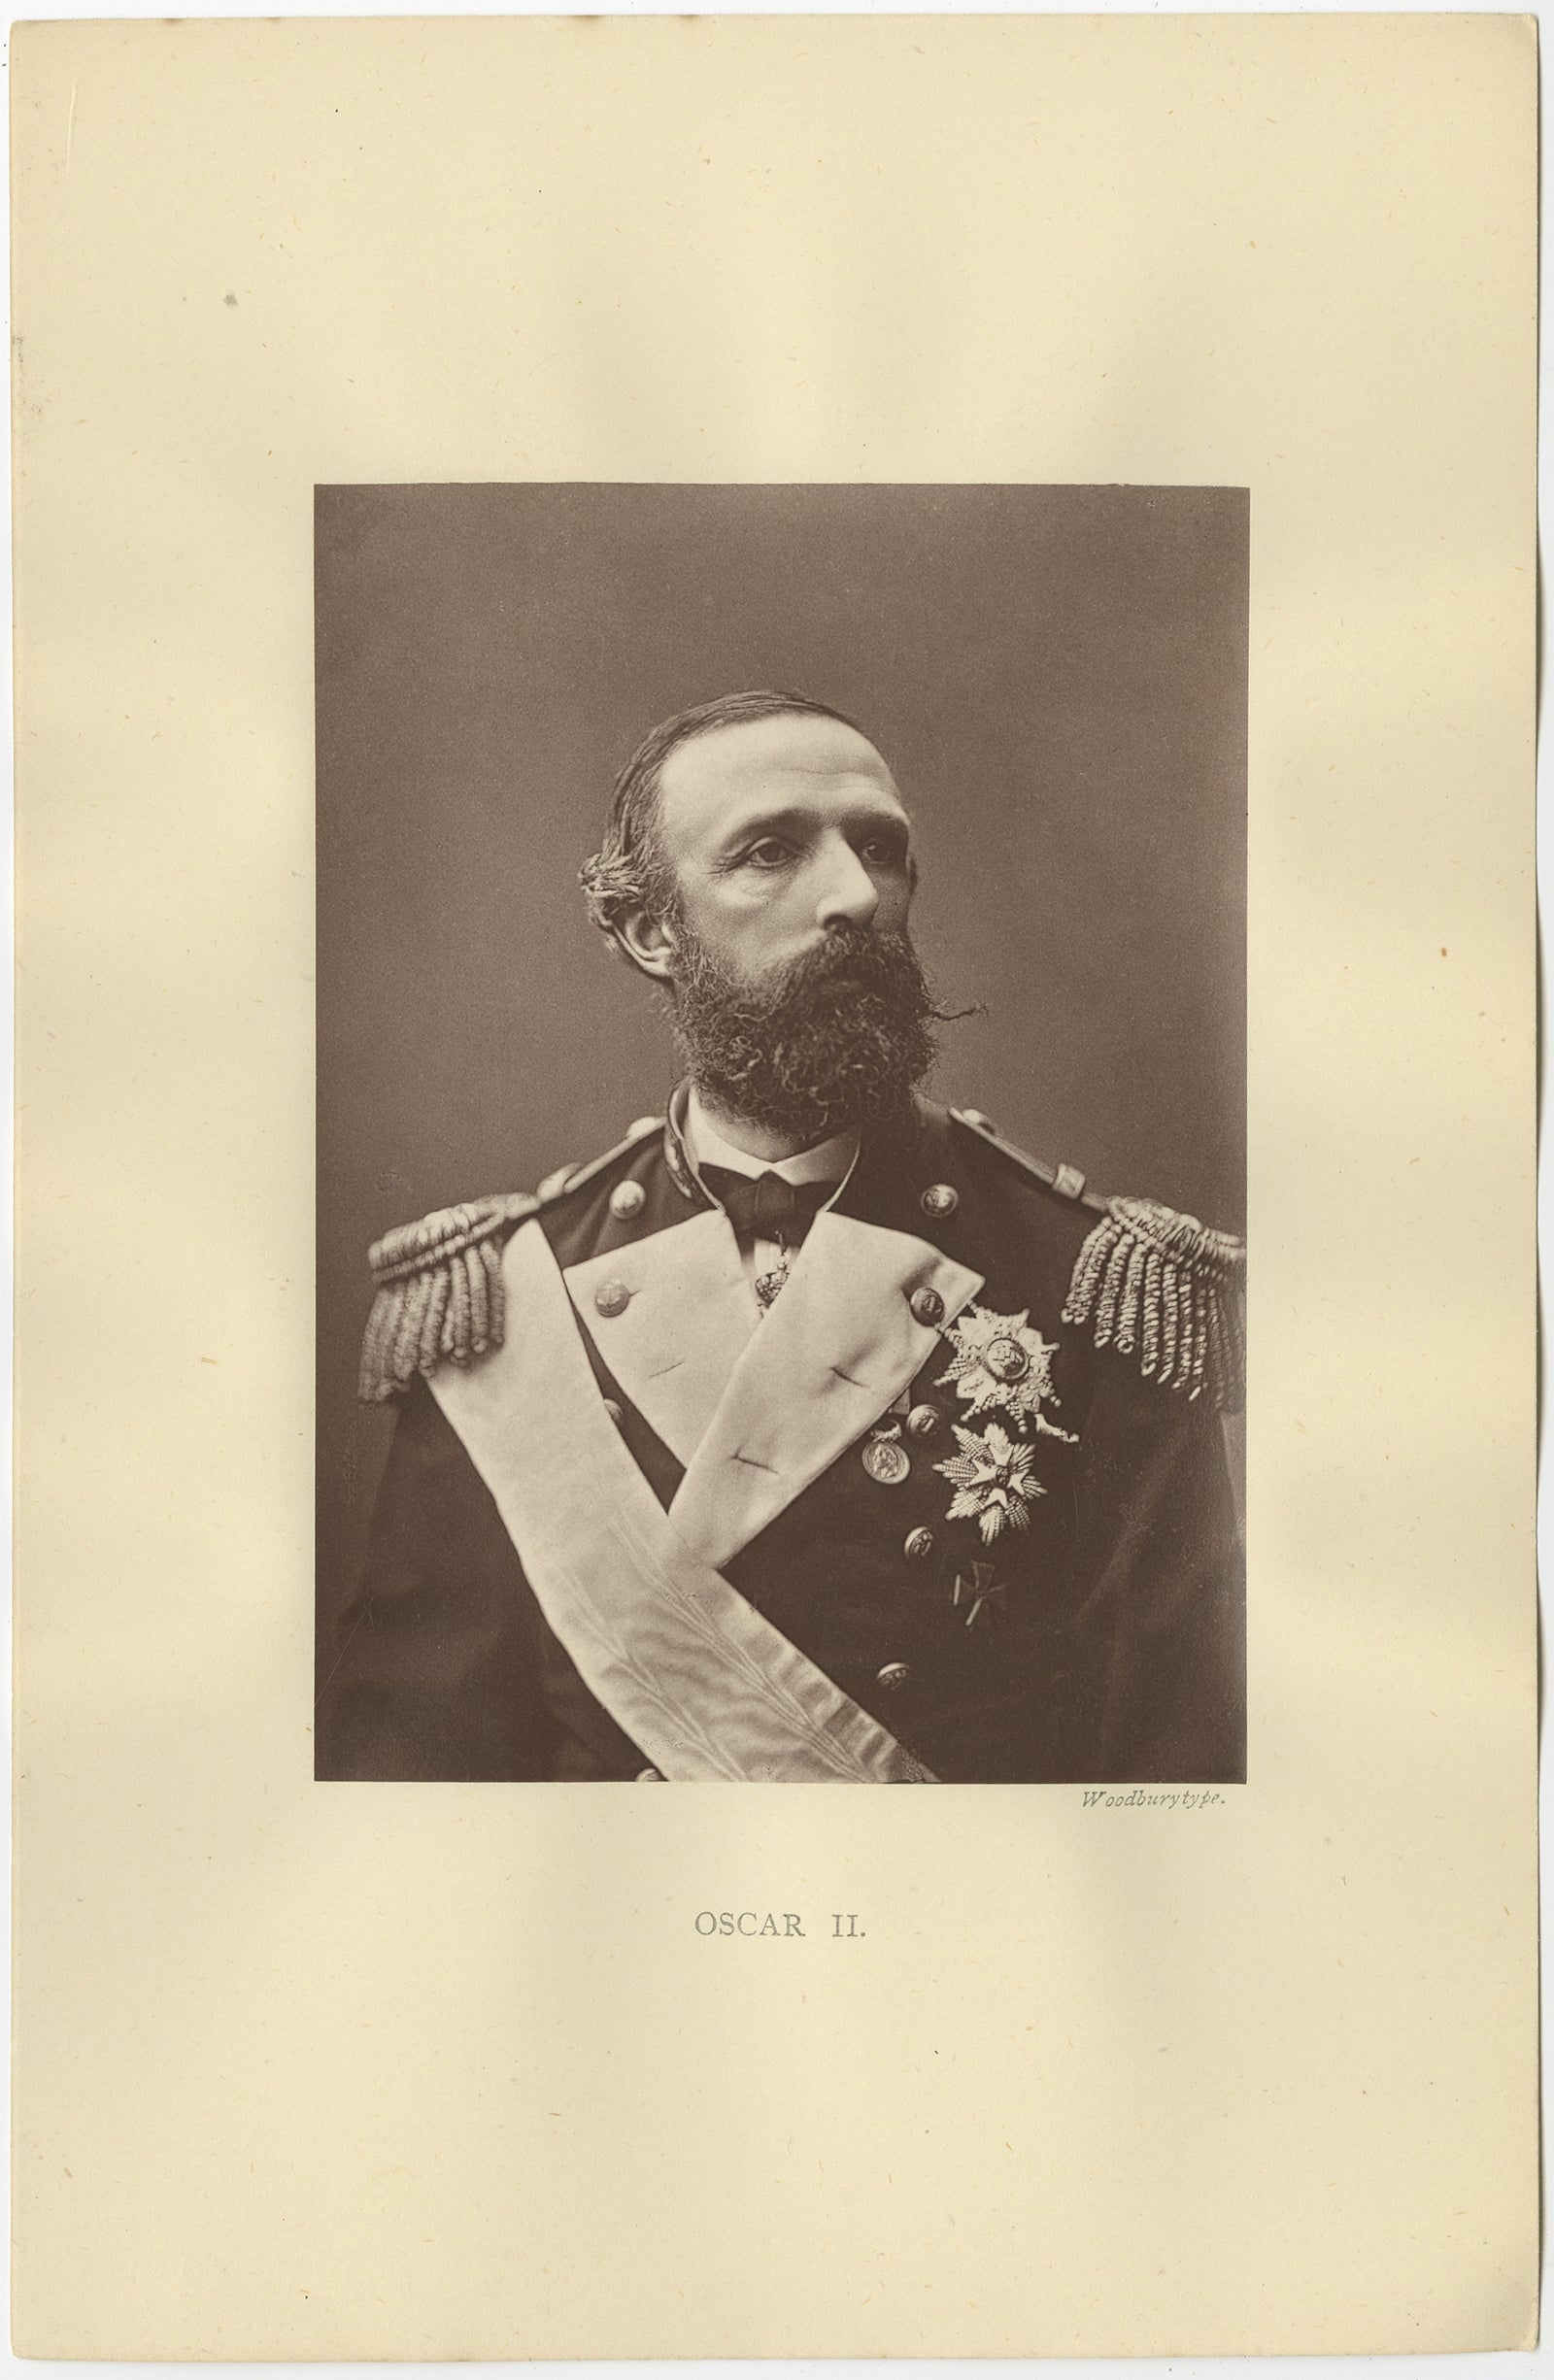 Antique portrait titled 'Oscar II'. 

Old print depicting King Oscar II Of Sweden. This is a Woodburytype or carbon print photograph mounted to paper.

Artists and Engravers: Anonymous.

Condition: Very good, please study image carefully.